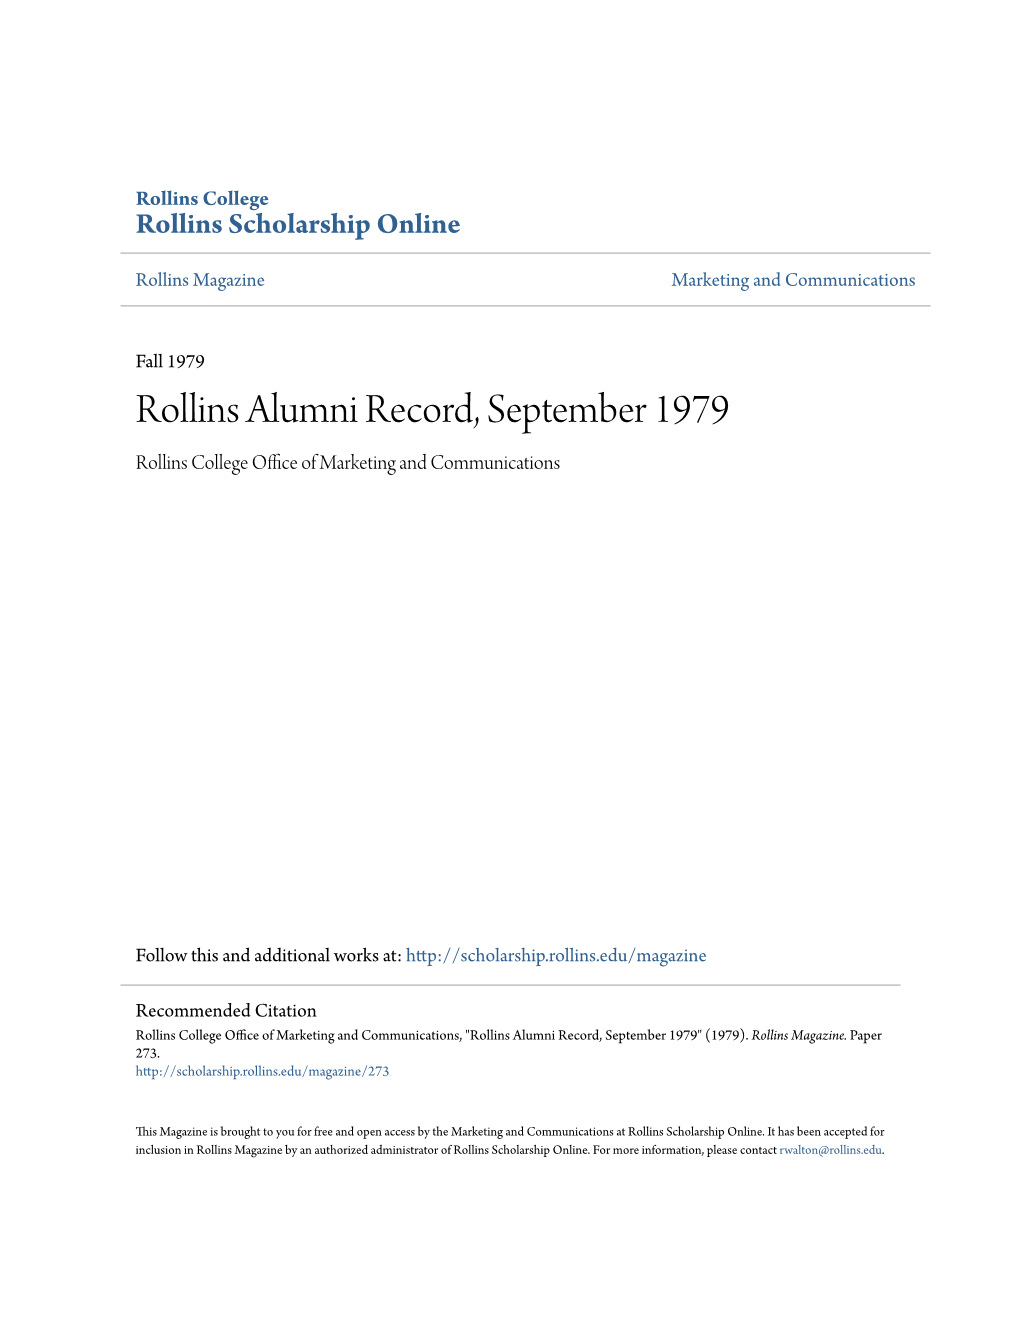 Rollins Alumni Record, September 1979 Rollins College Office Ofa M Rketing and Communications